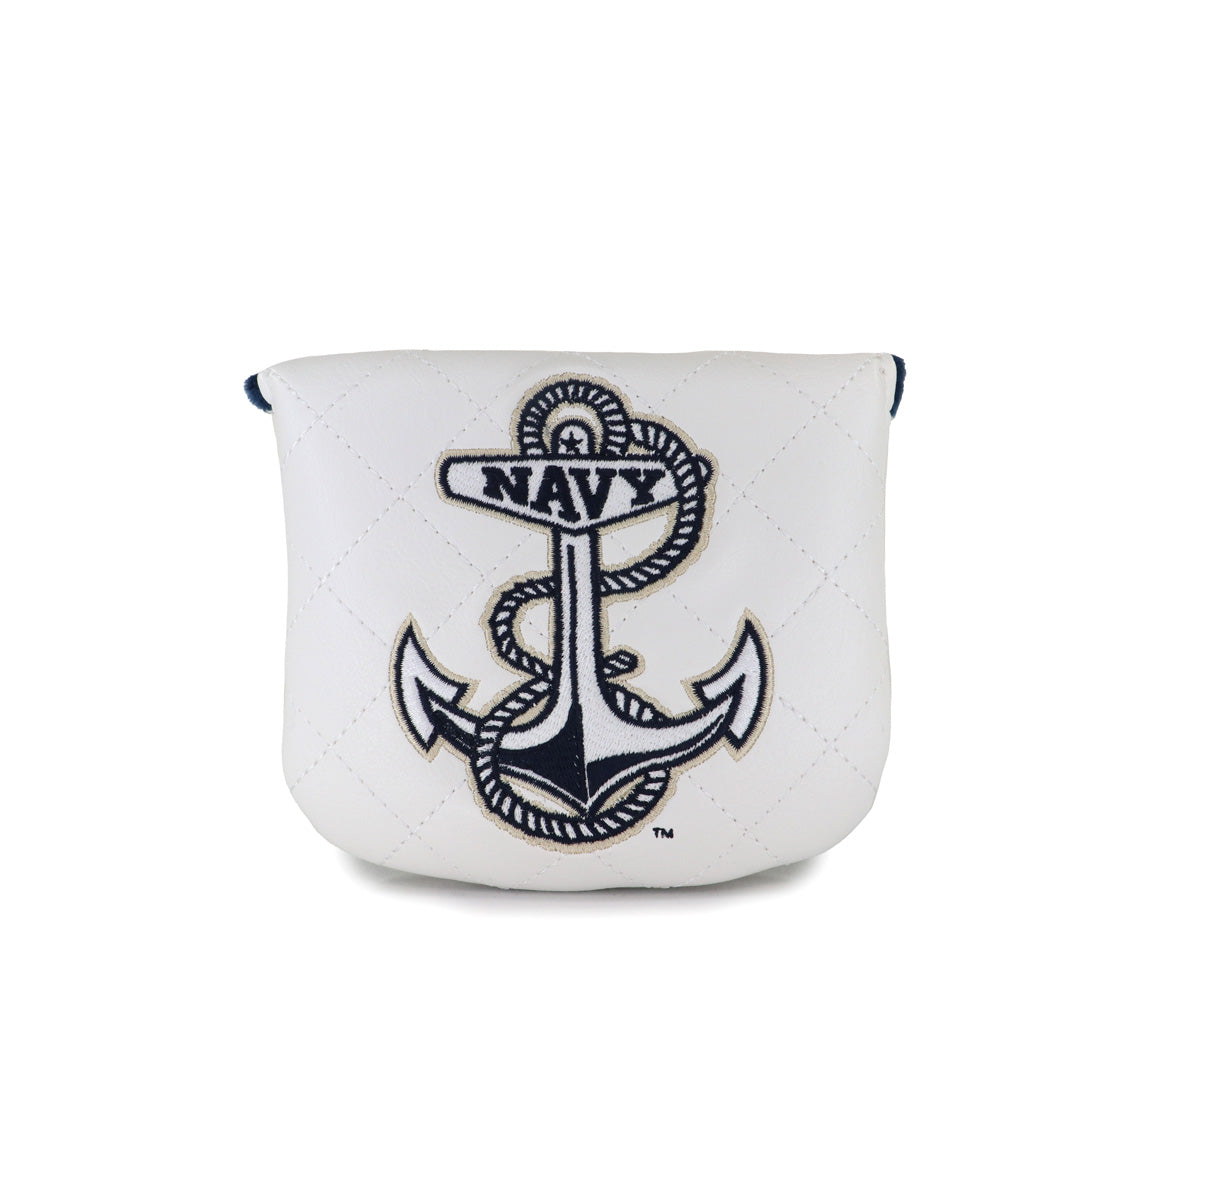 Naval Academy Diamond Stitch Mallet Cover – EP Headcovers